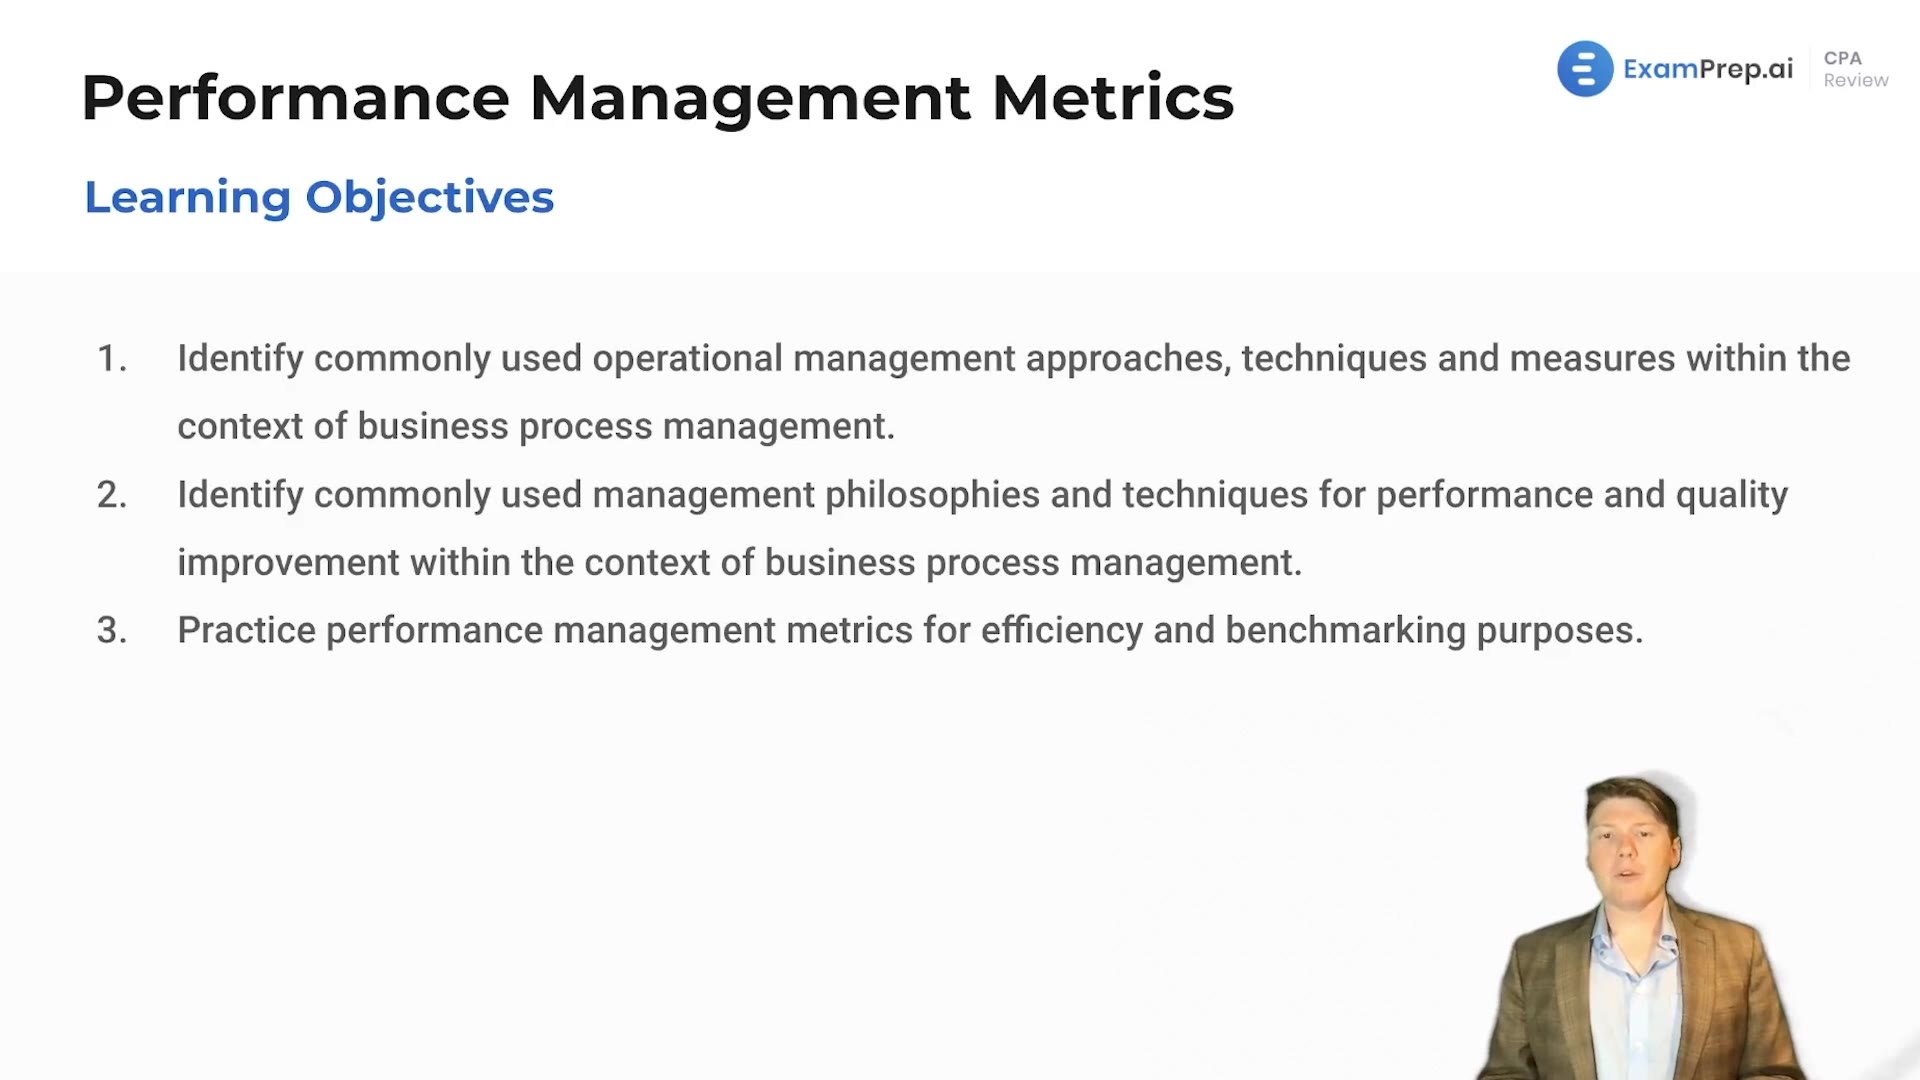 Performance Management Metrics Overview and Objectives lesson thumbnail